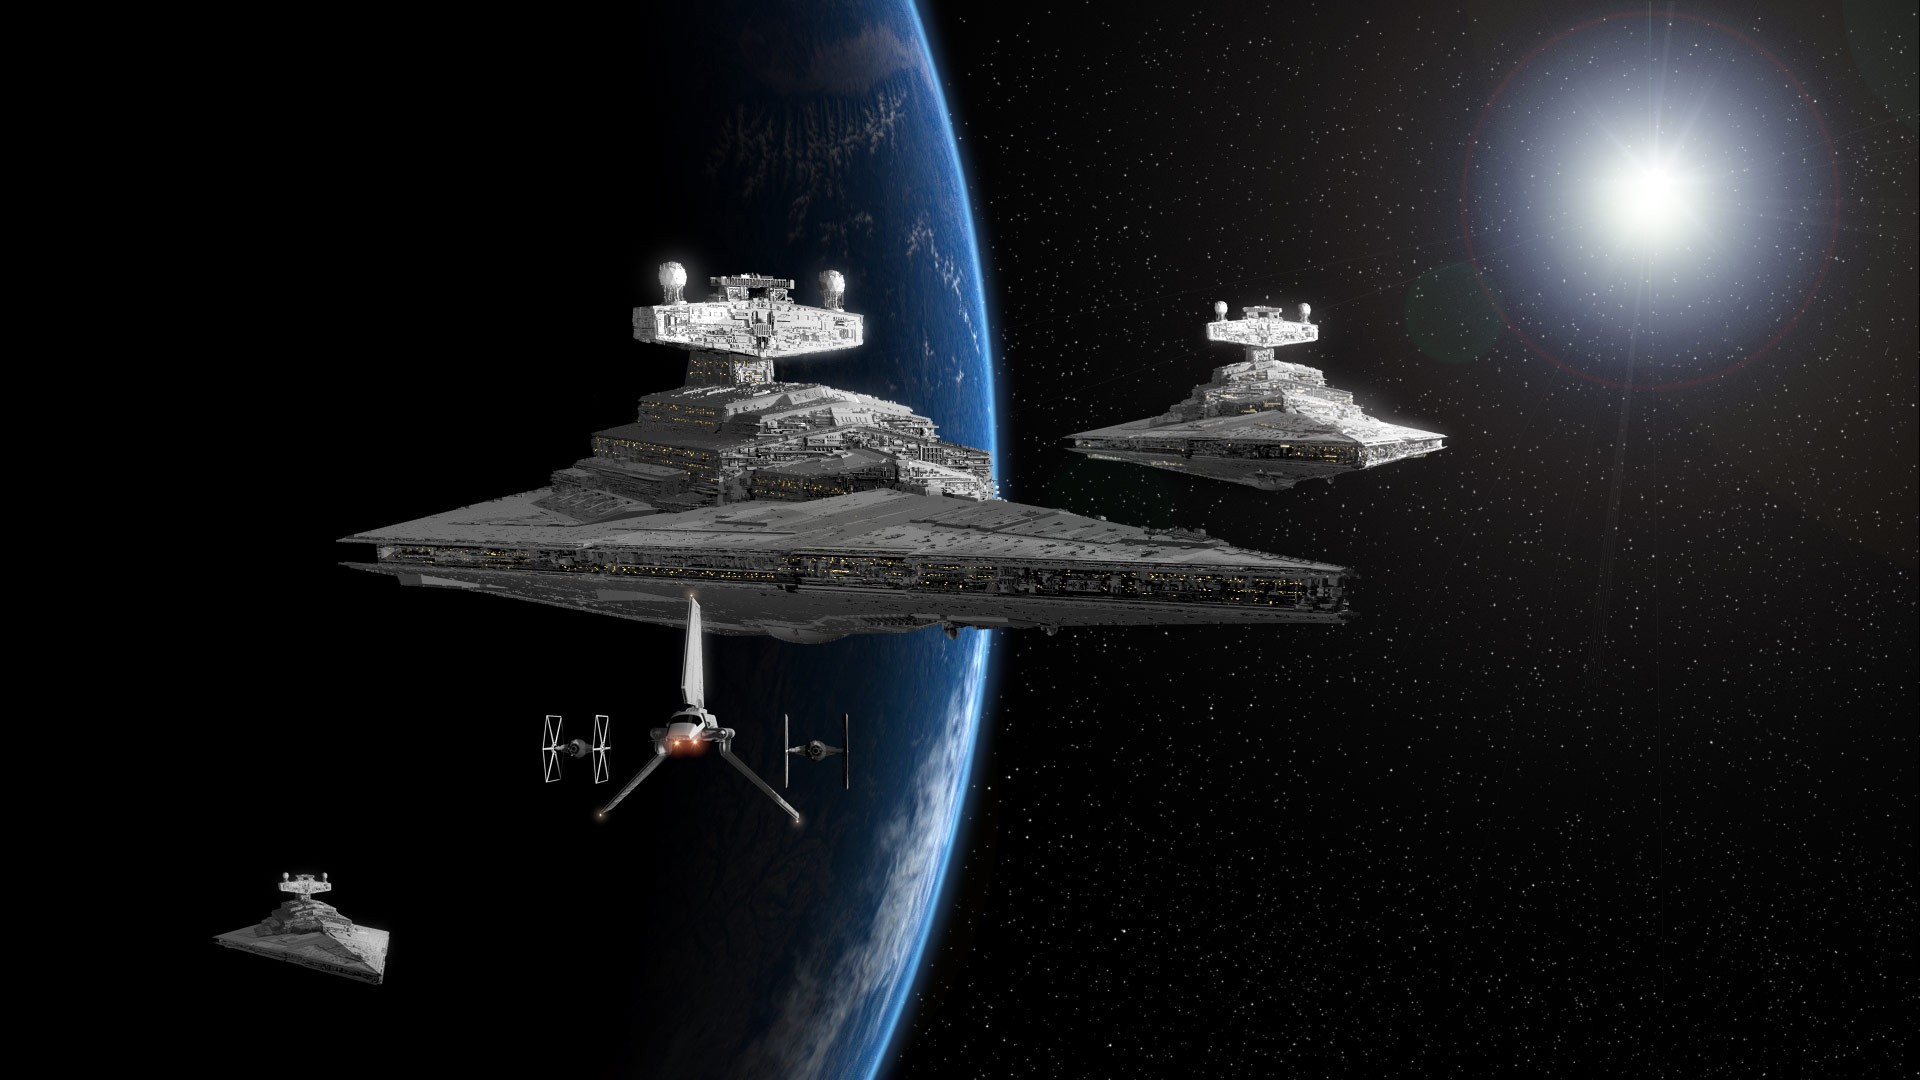 General 1920x1080 Star Wars Star Destroyer Star Wars Ships digital art Imperial Forces space science fiction planet vehicle Galactic Empire stars sunlight lens flare